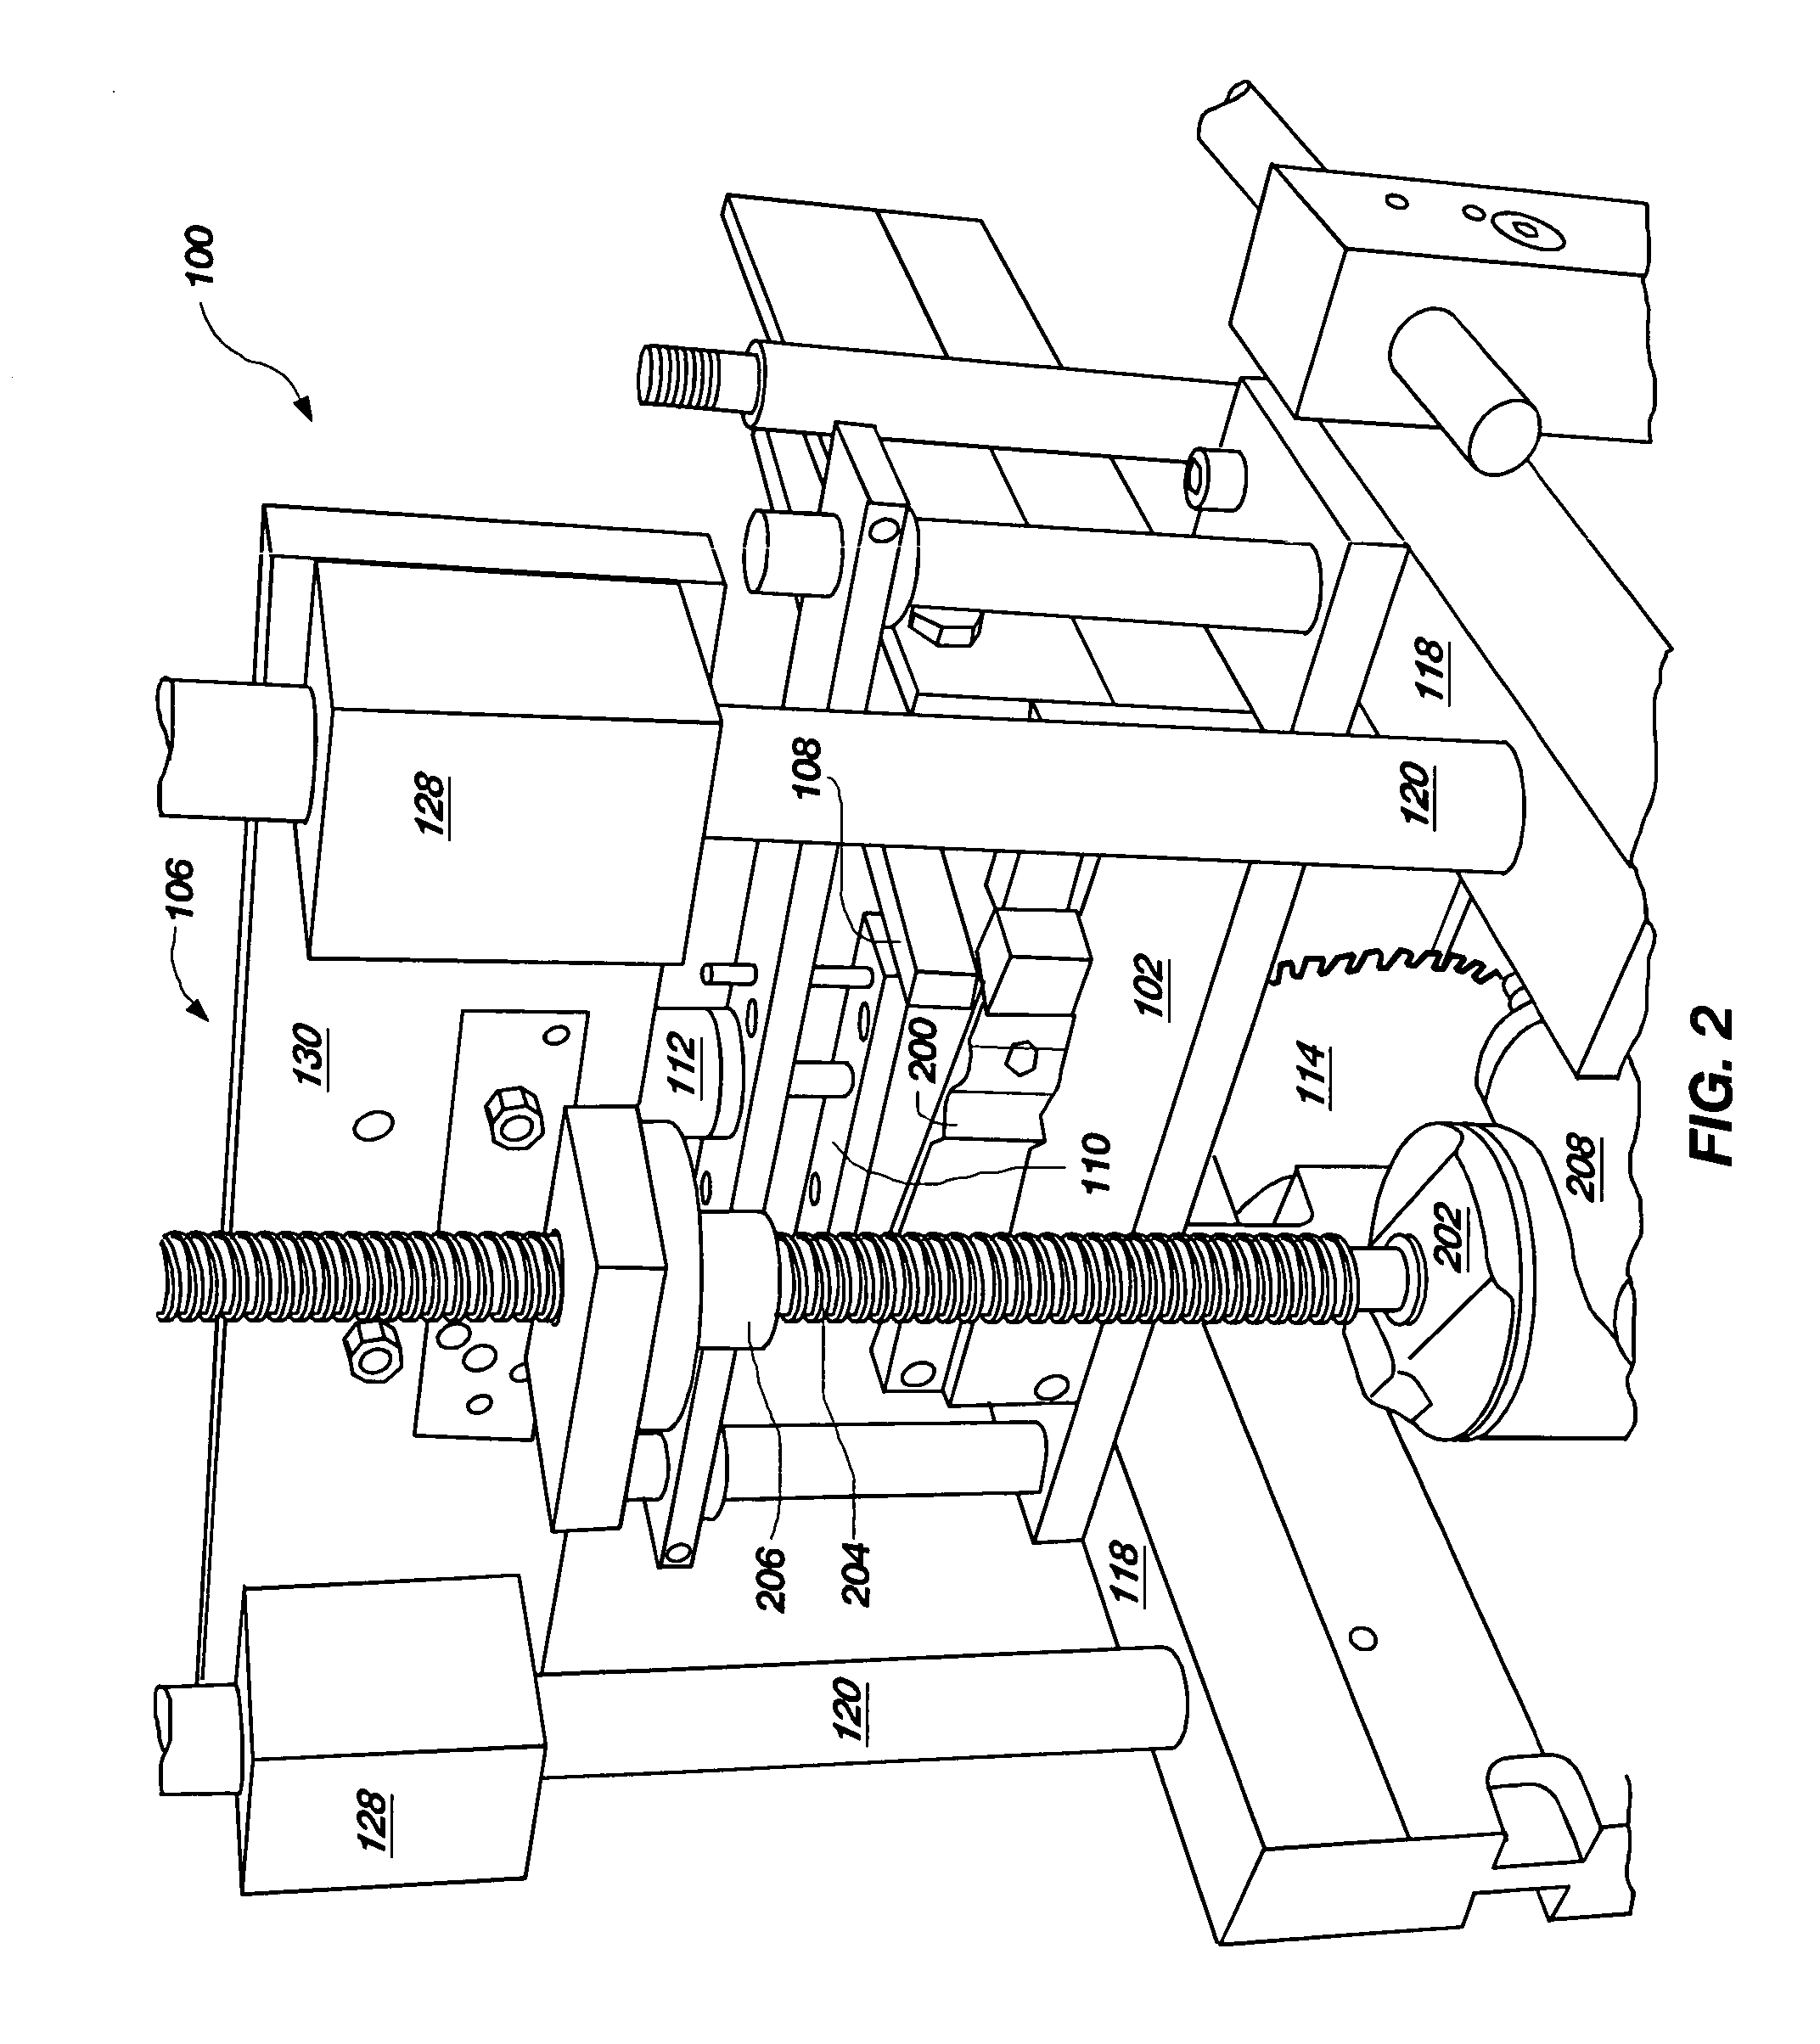 Coping apparatus and method of operation